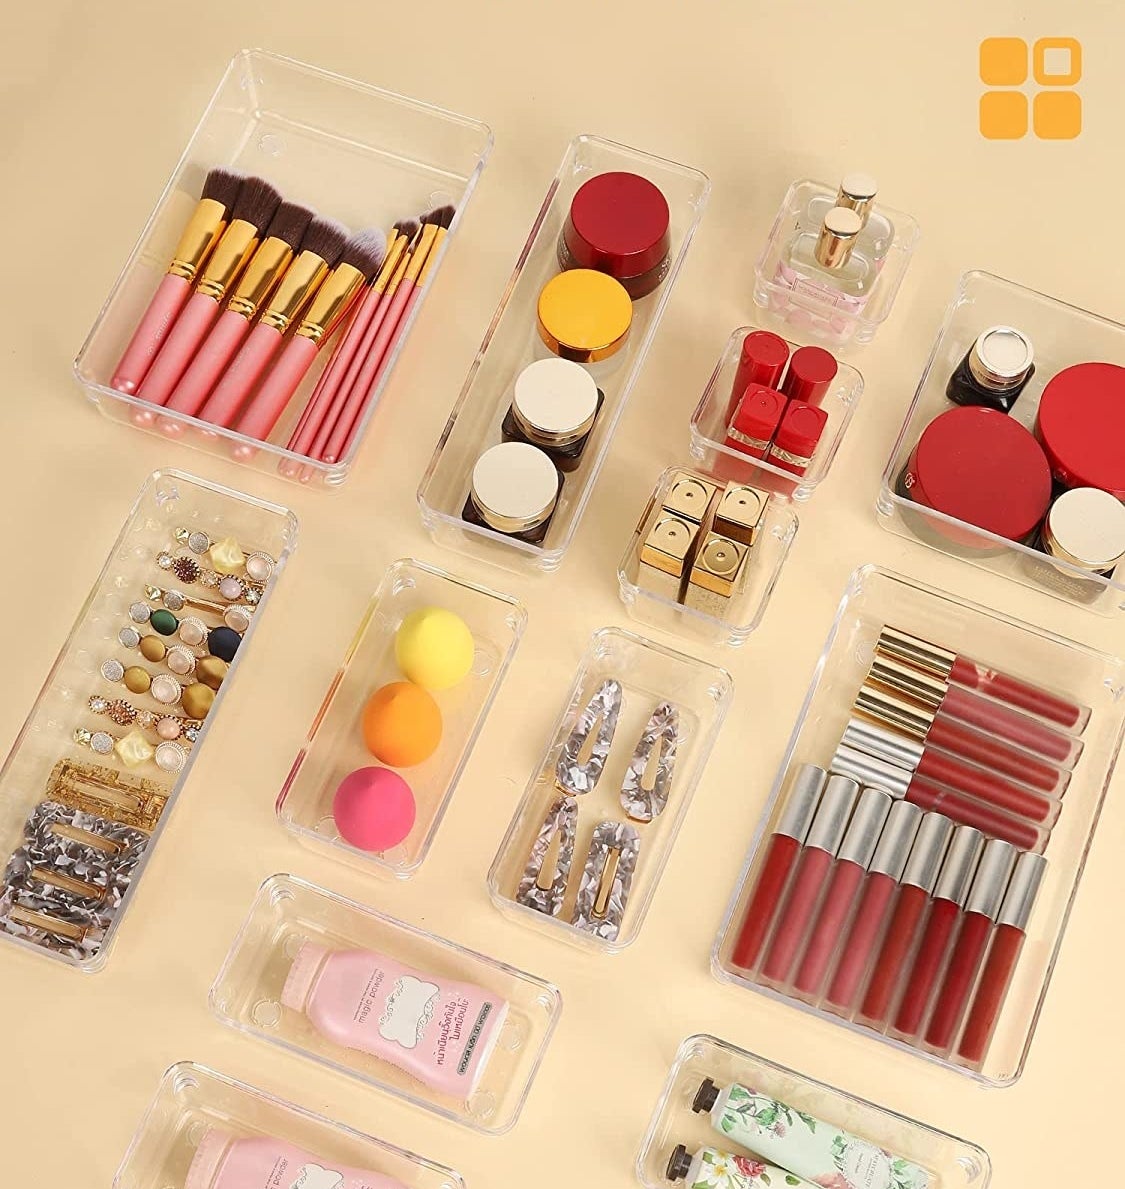 the assorted organizers filled with objects like makeup brushes, lip glosses and hair pins